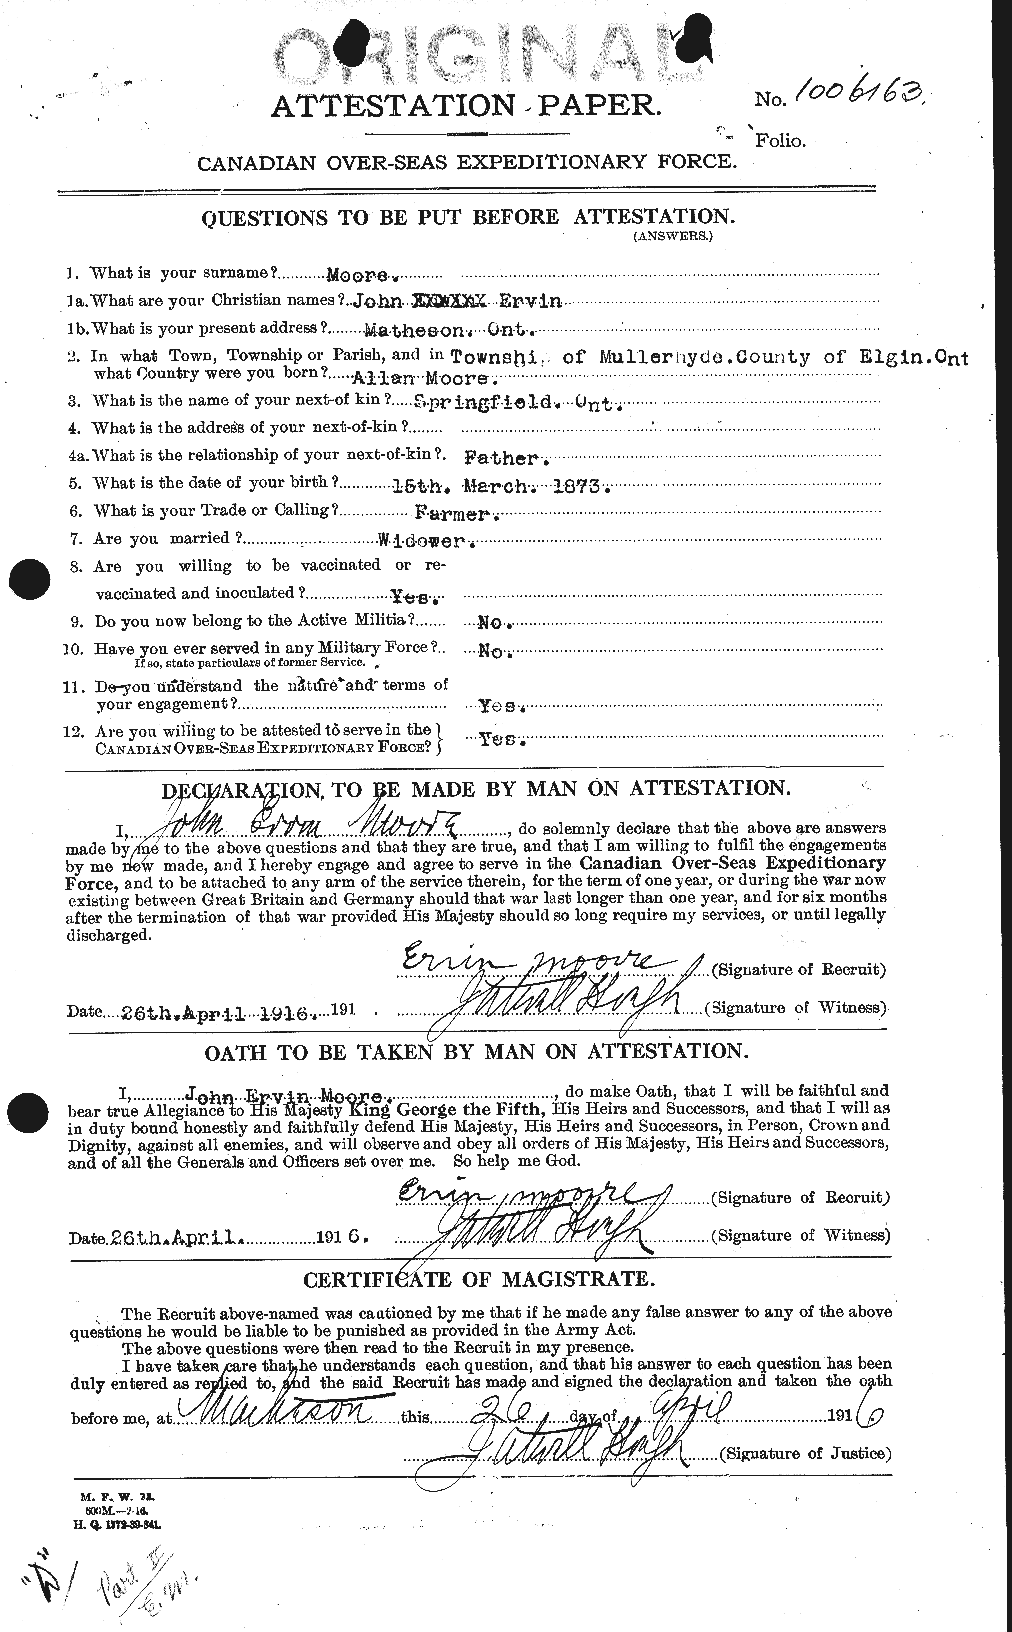 Personnel Records of the First World War - CEF 503286a